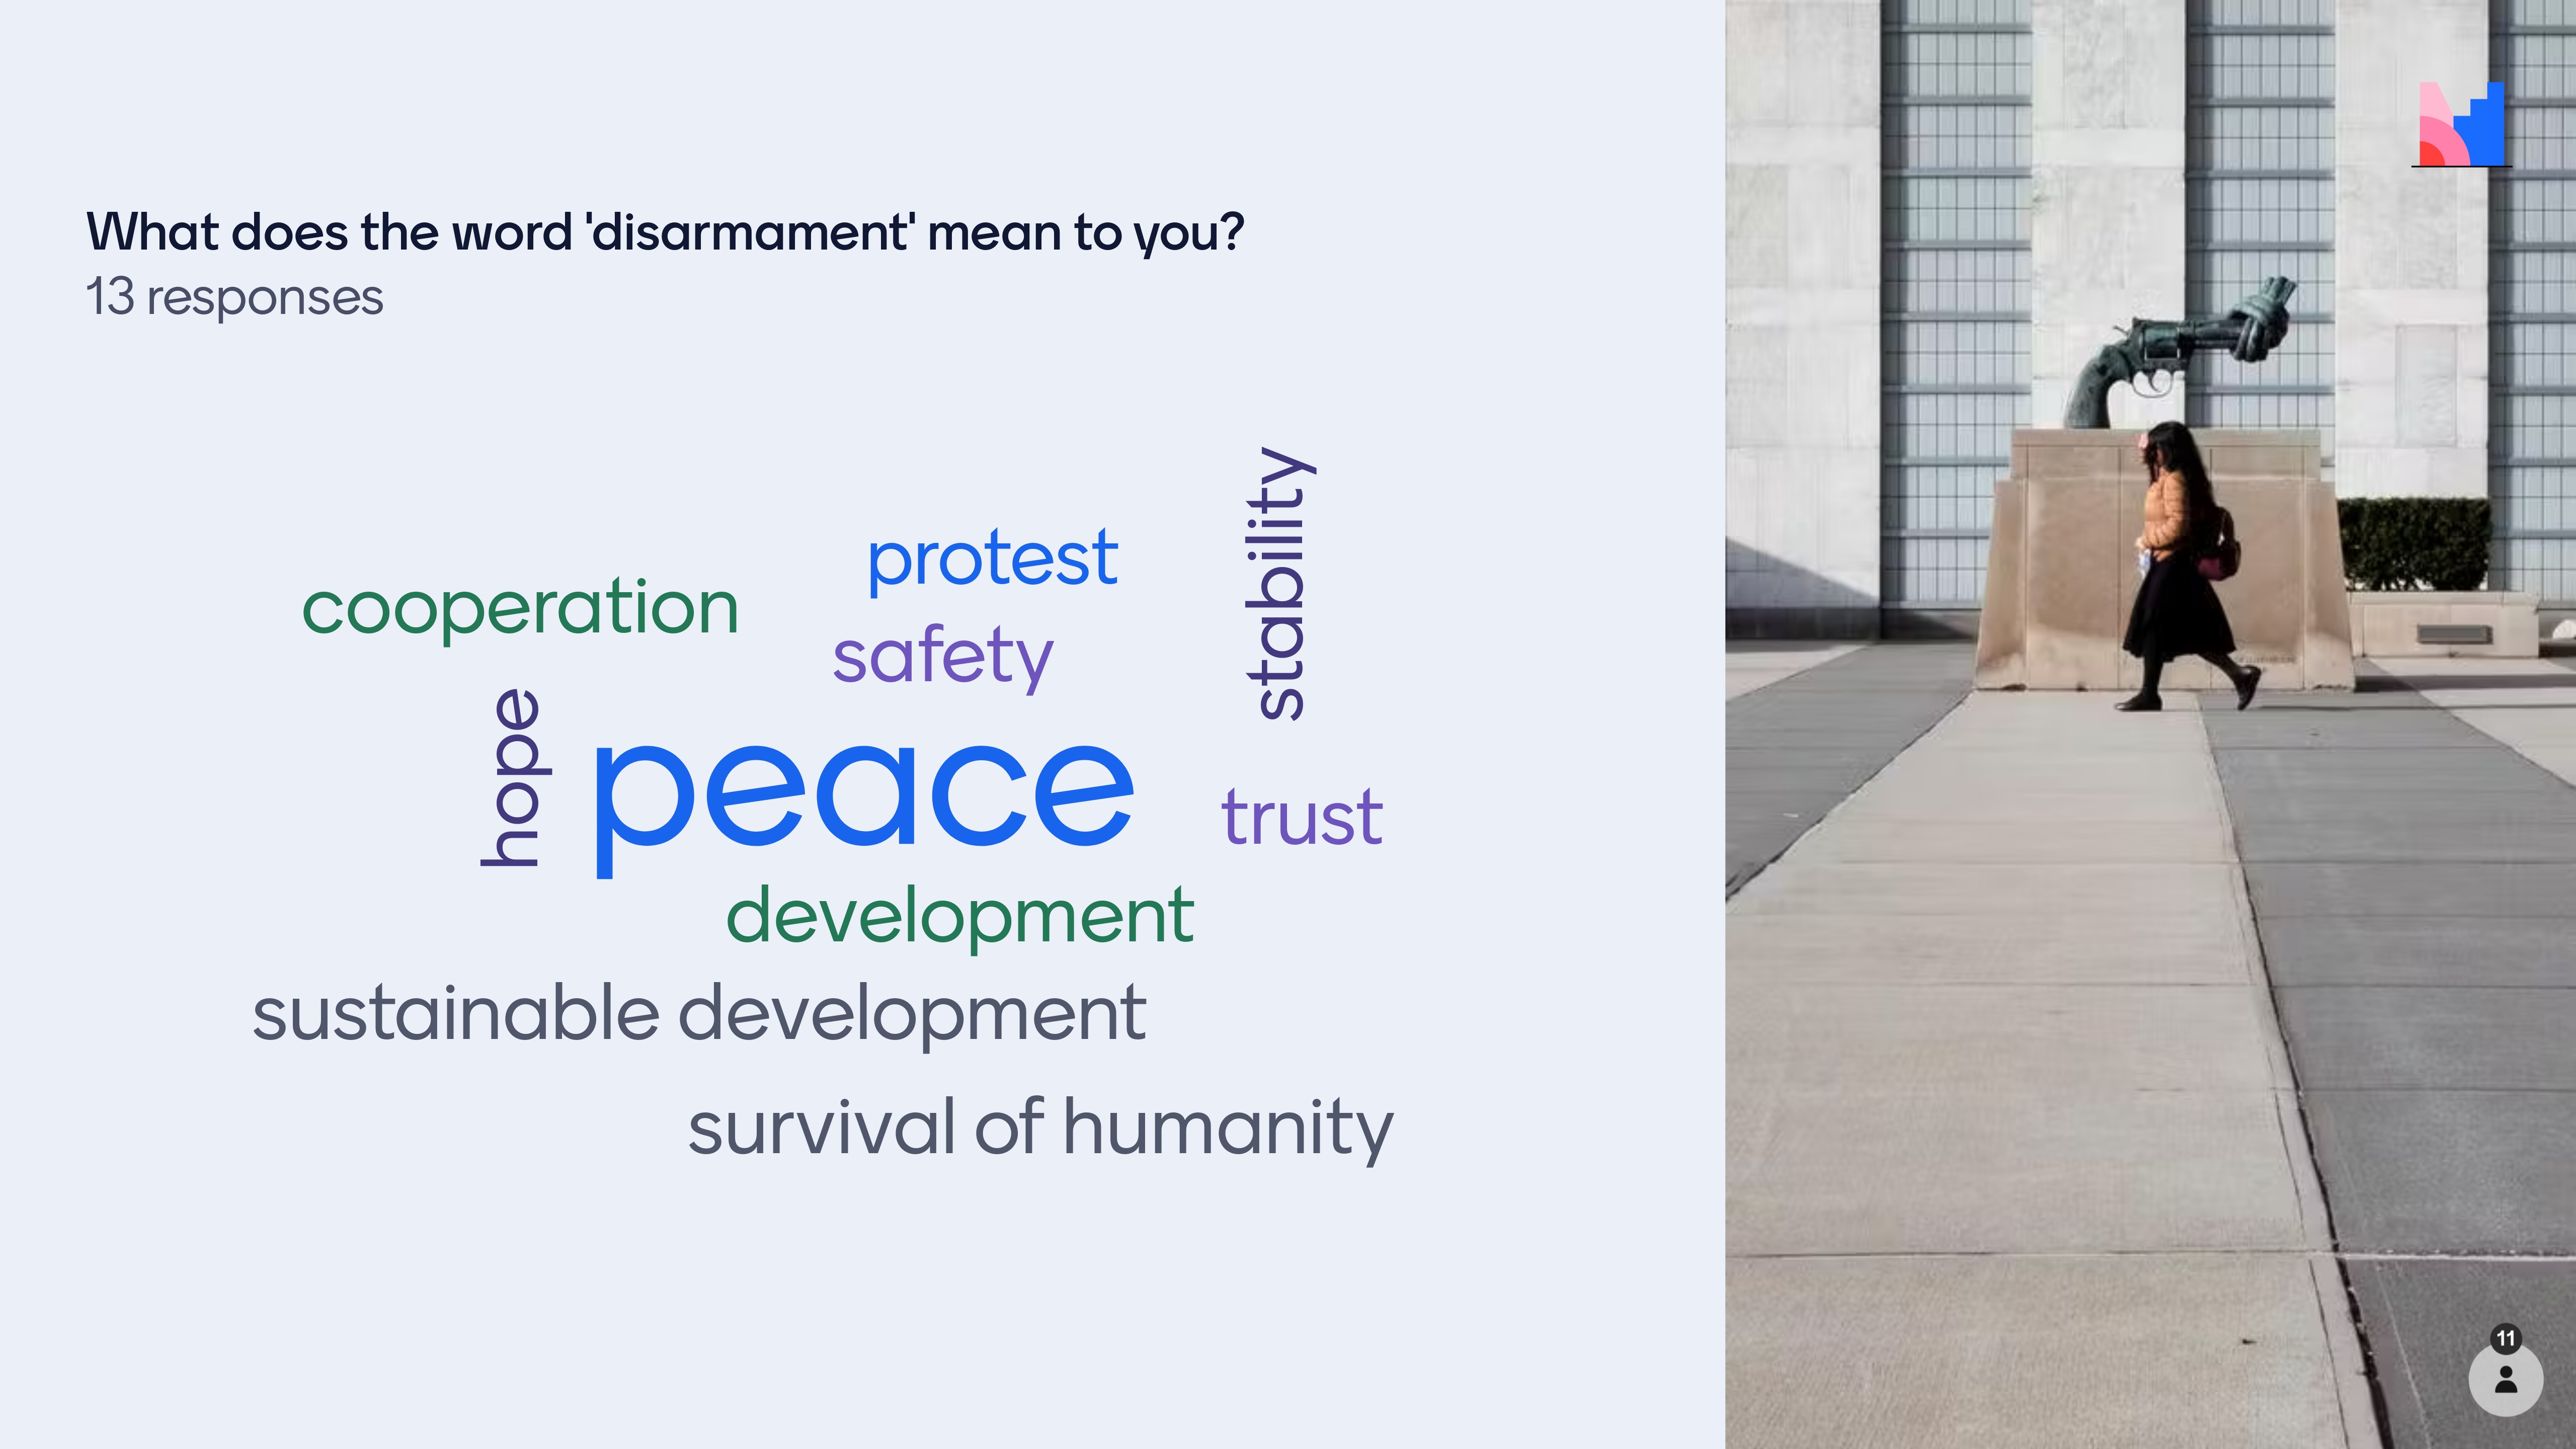 UN Youth Champions for Disarmament share what disarmament means to them, with some saying 'peace' and 'stability.'